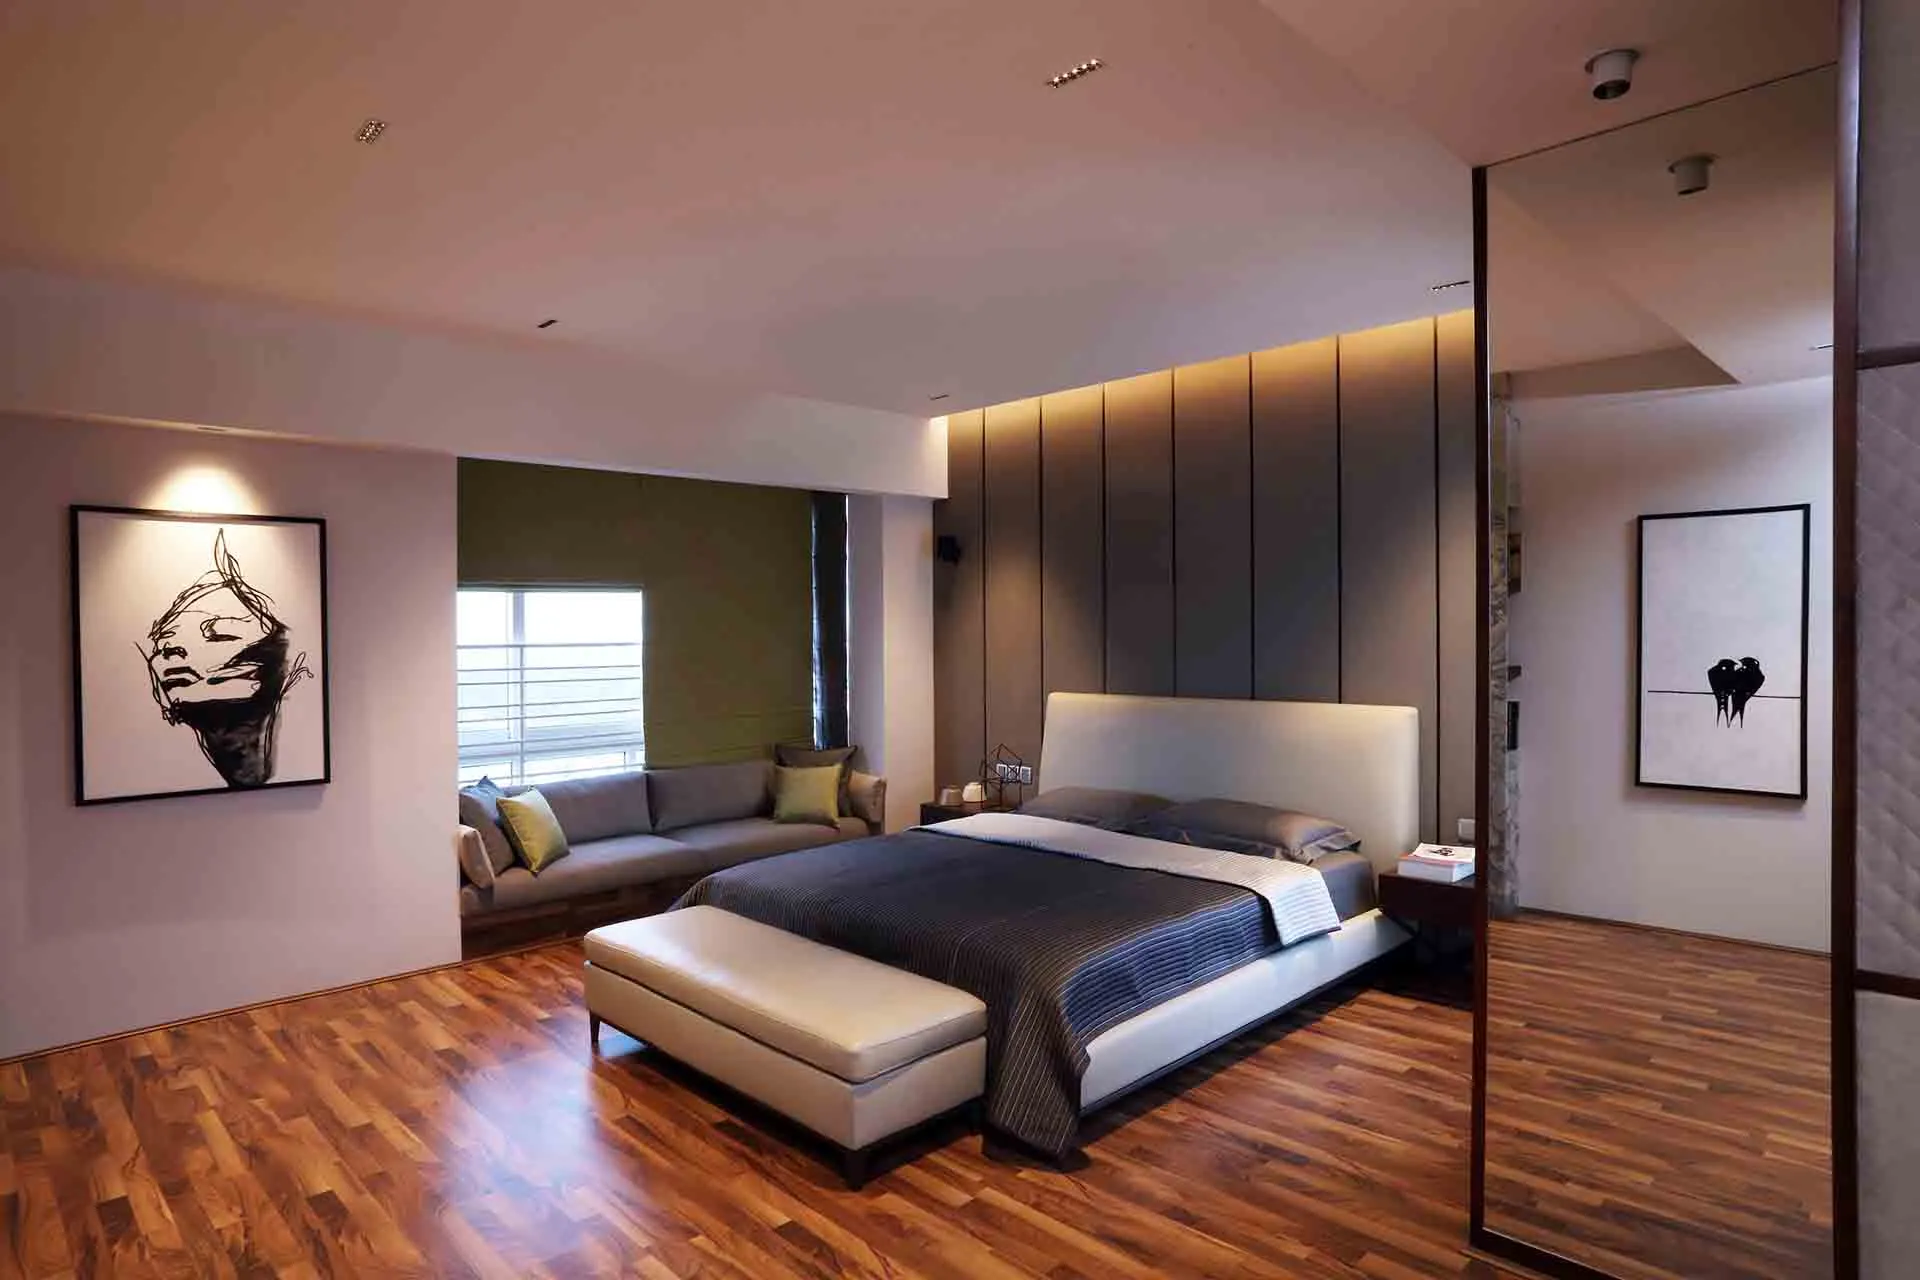 brown wooden floors in a bedroom with bed, painting, mirror